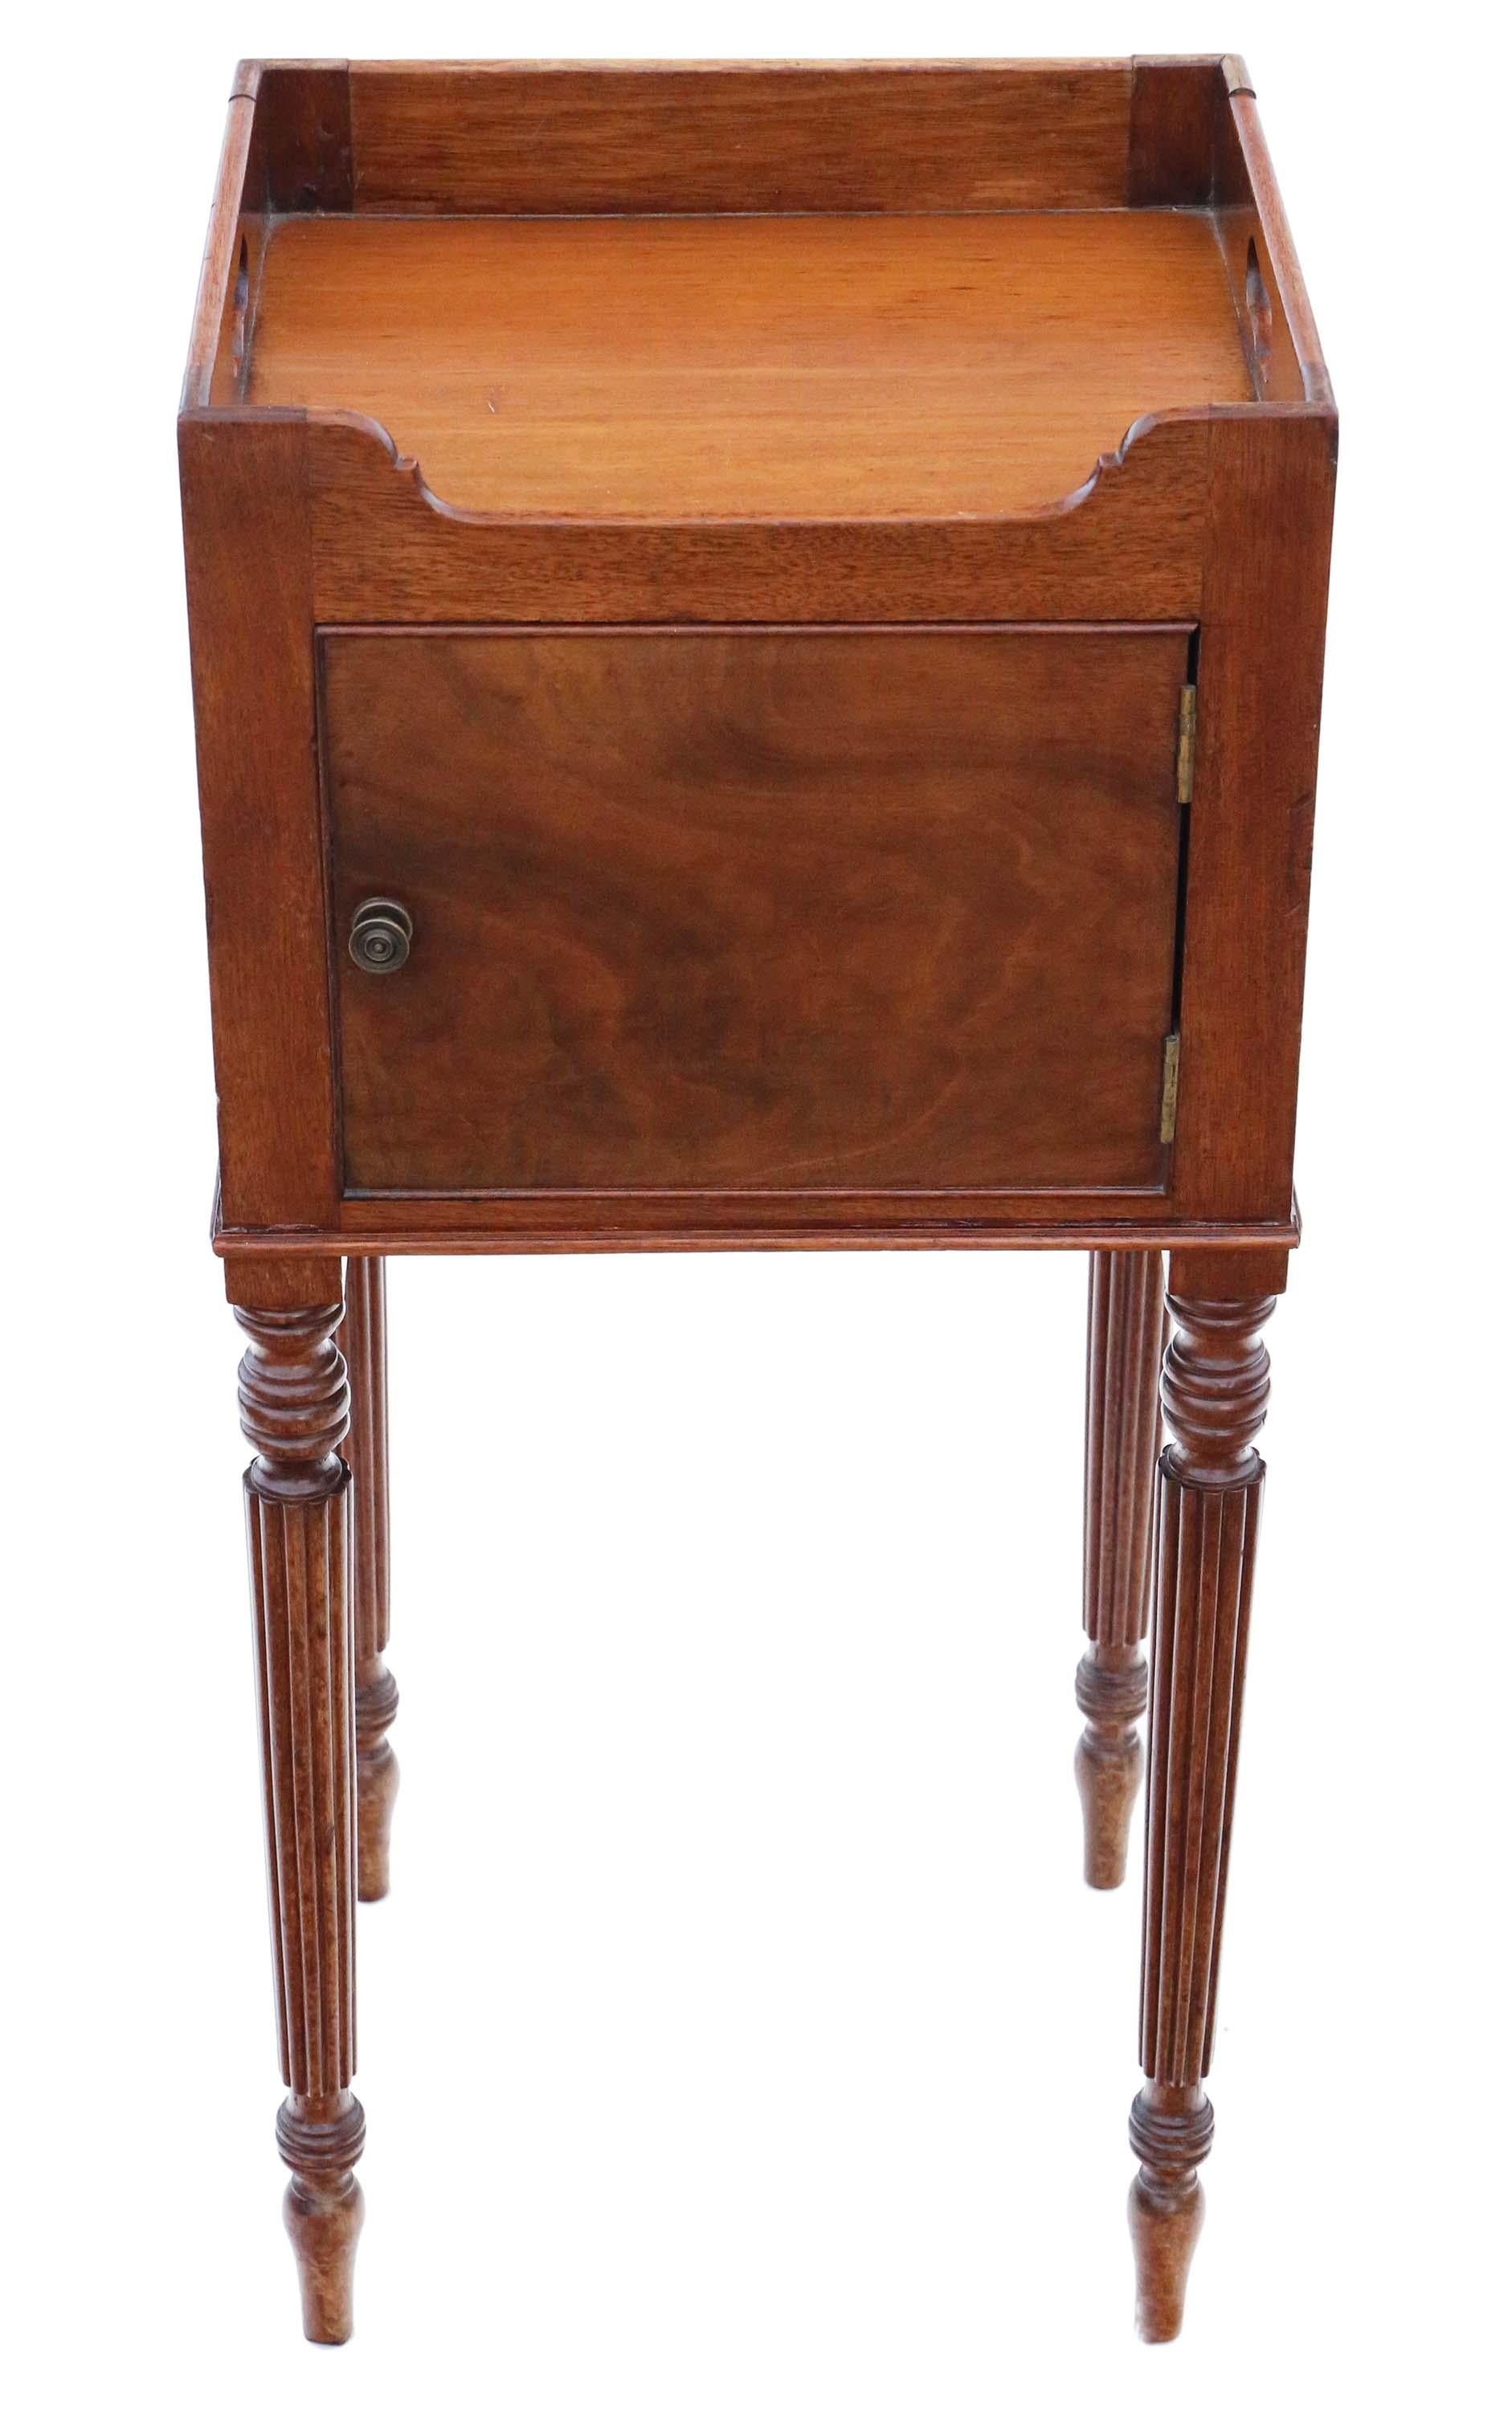 Antique quality 19th Century nightstand mahogany tray top washstand bedside table Georgian  .

Great rare item with no loose joints and no woodworm. The door has a catch.

Lovely age, colour and patina.

36cm wide x 33cm deep x 75cm high (plus 6cm